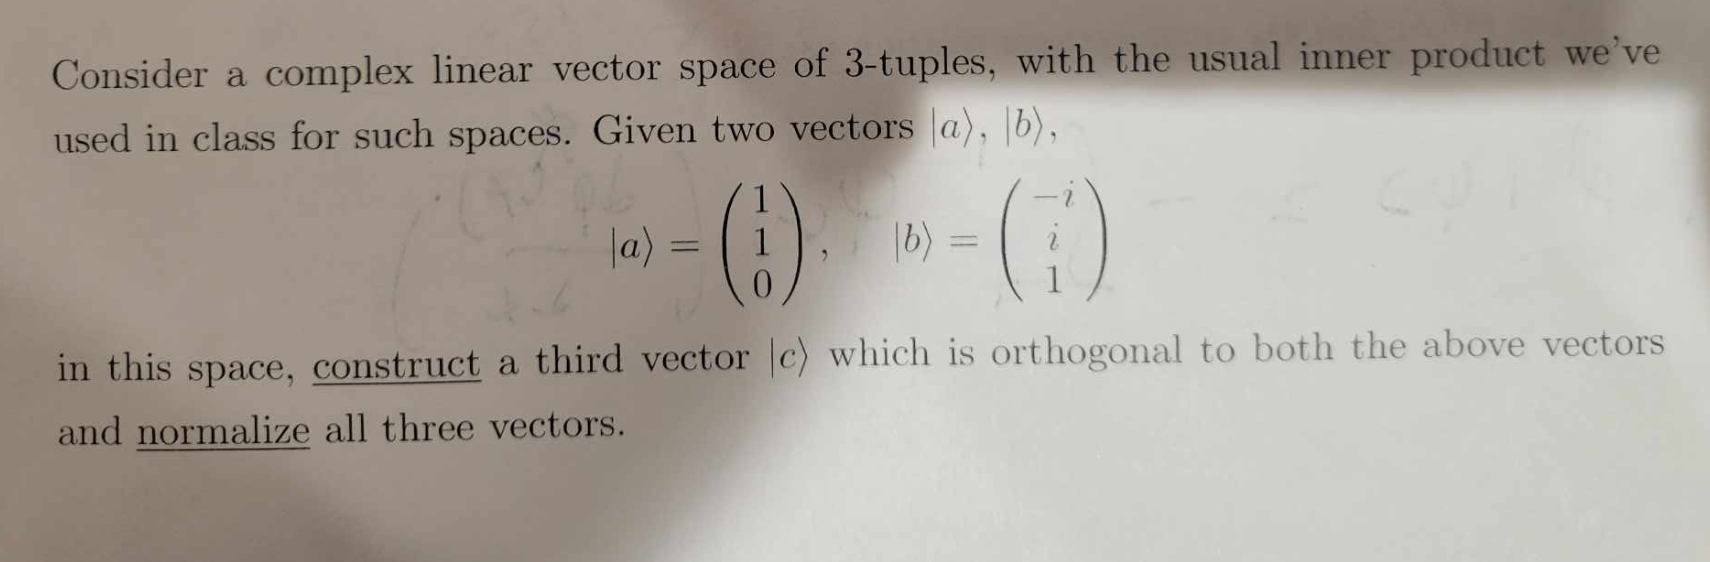 Consider a complex linear vector space of 3-tuples, with the usual inner product we've used in class for such